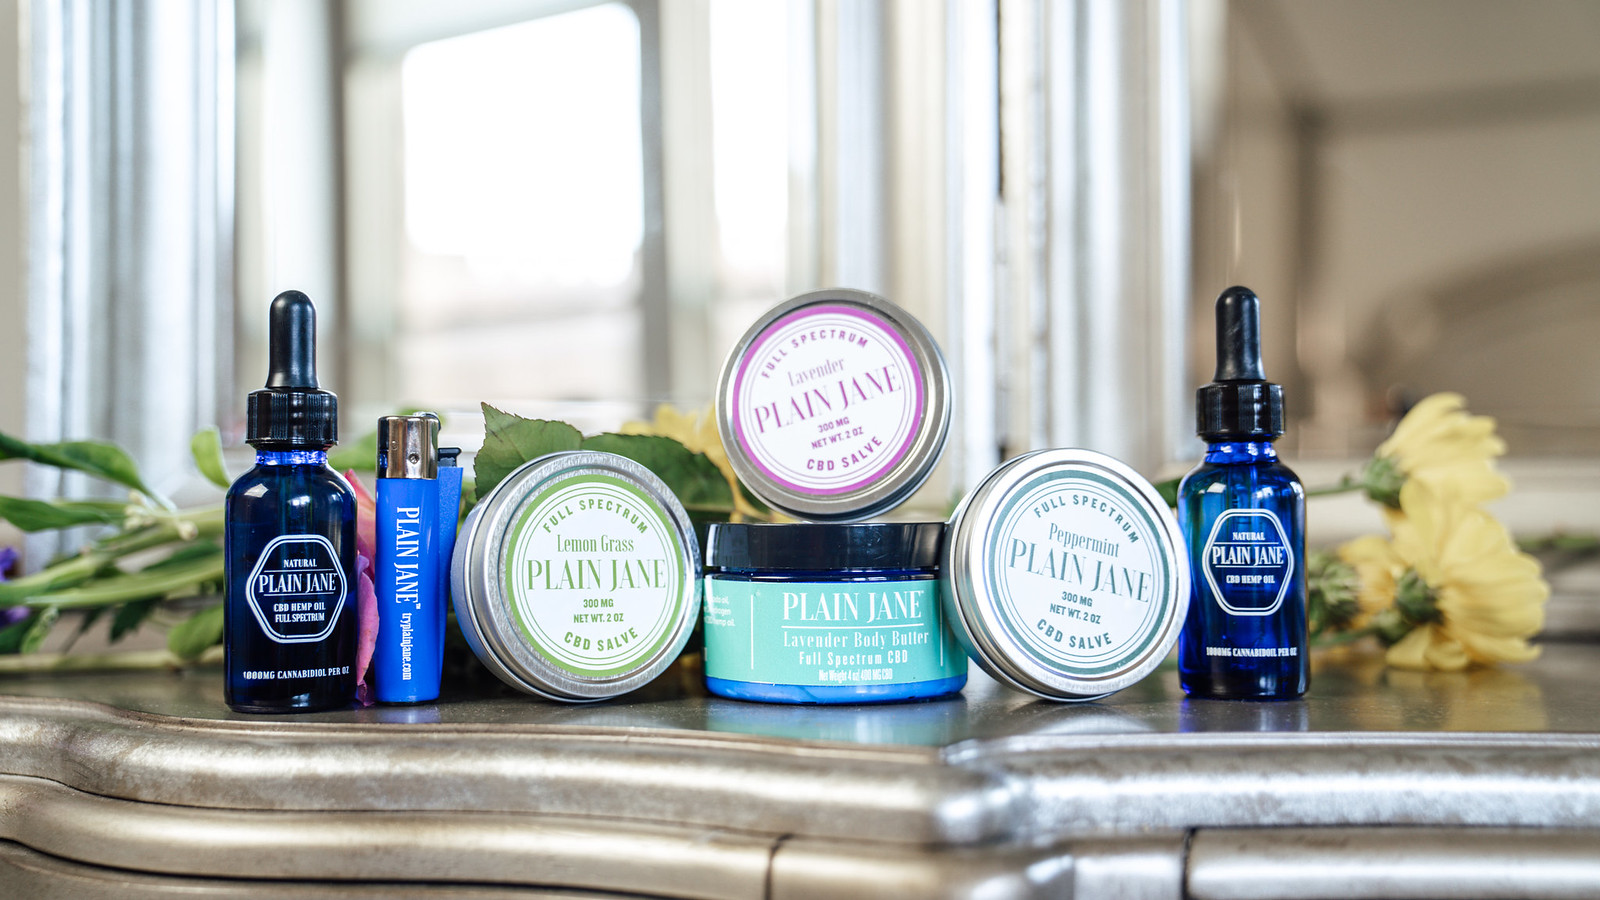 The different products offered by Plain Jane CBD lined up